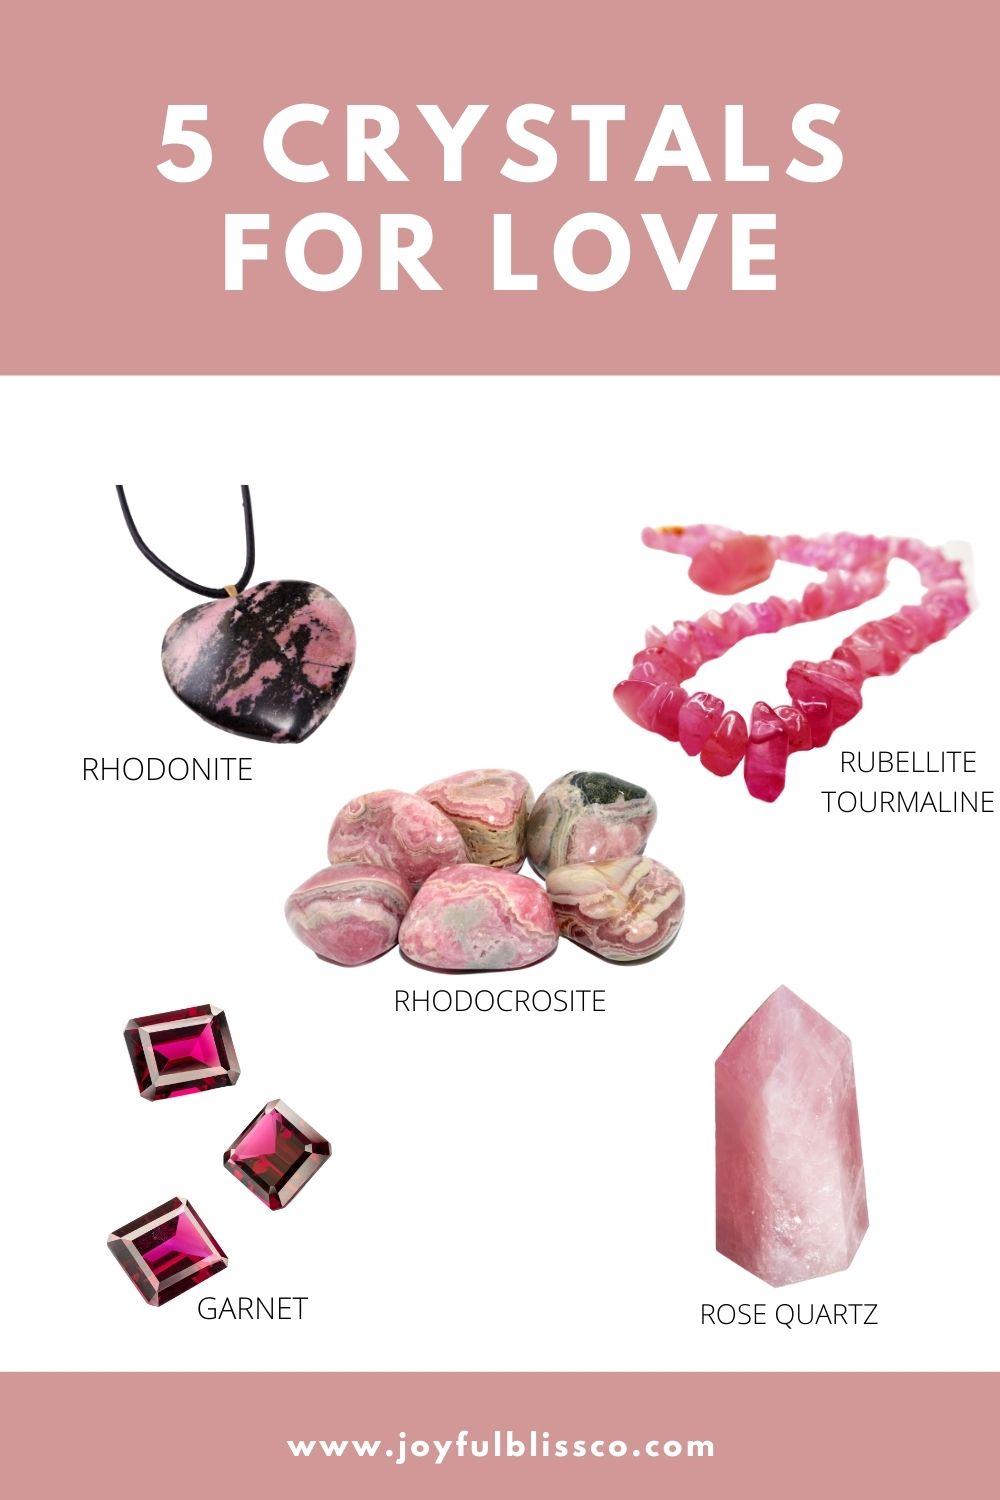 5 Crystals for Love